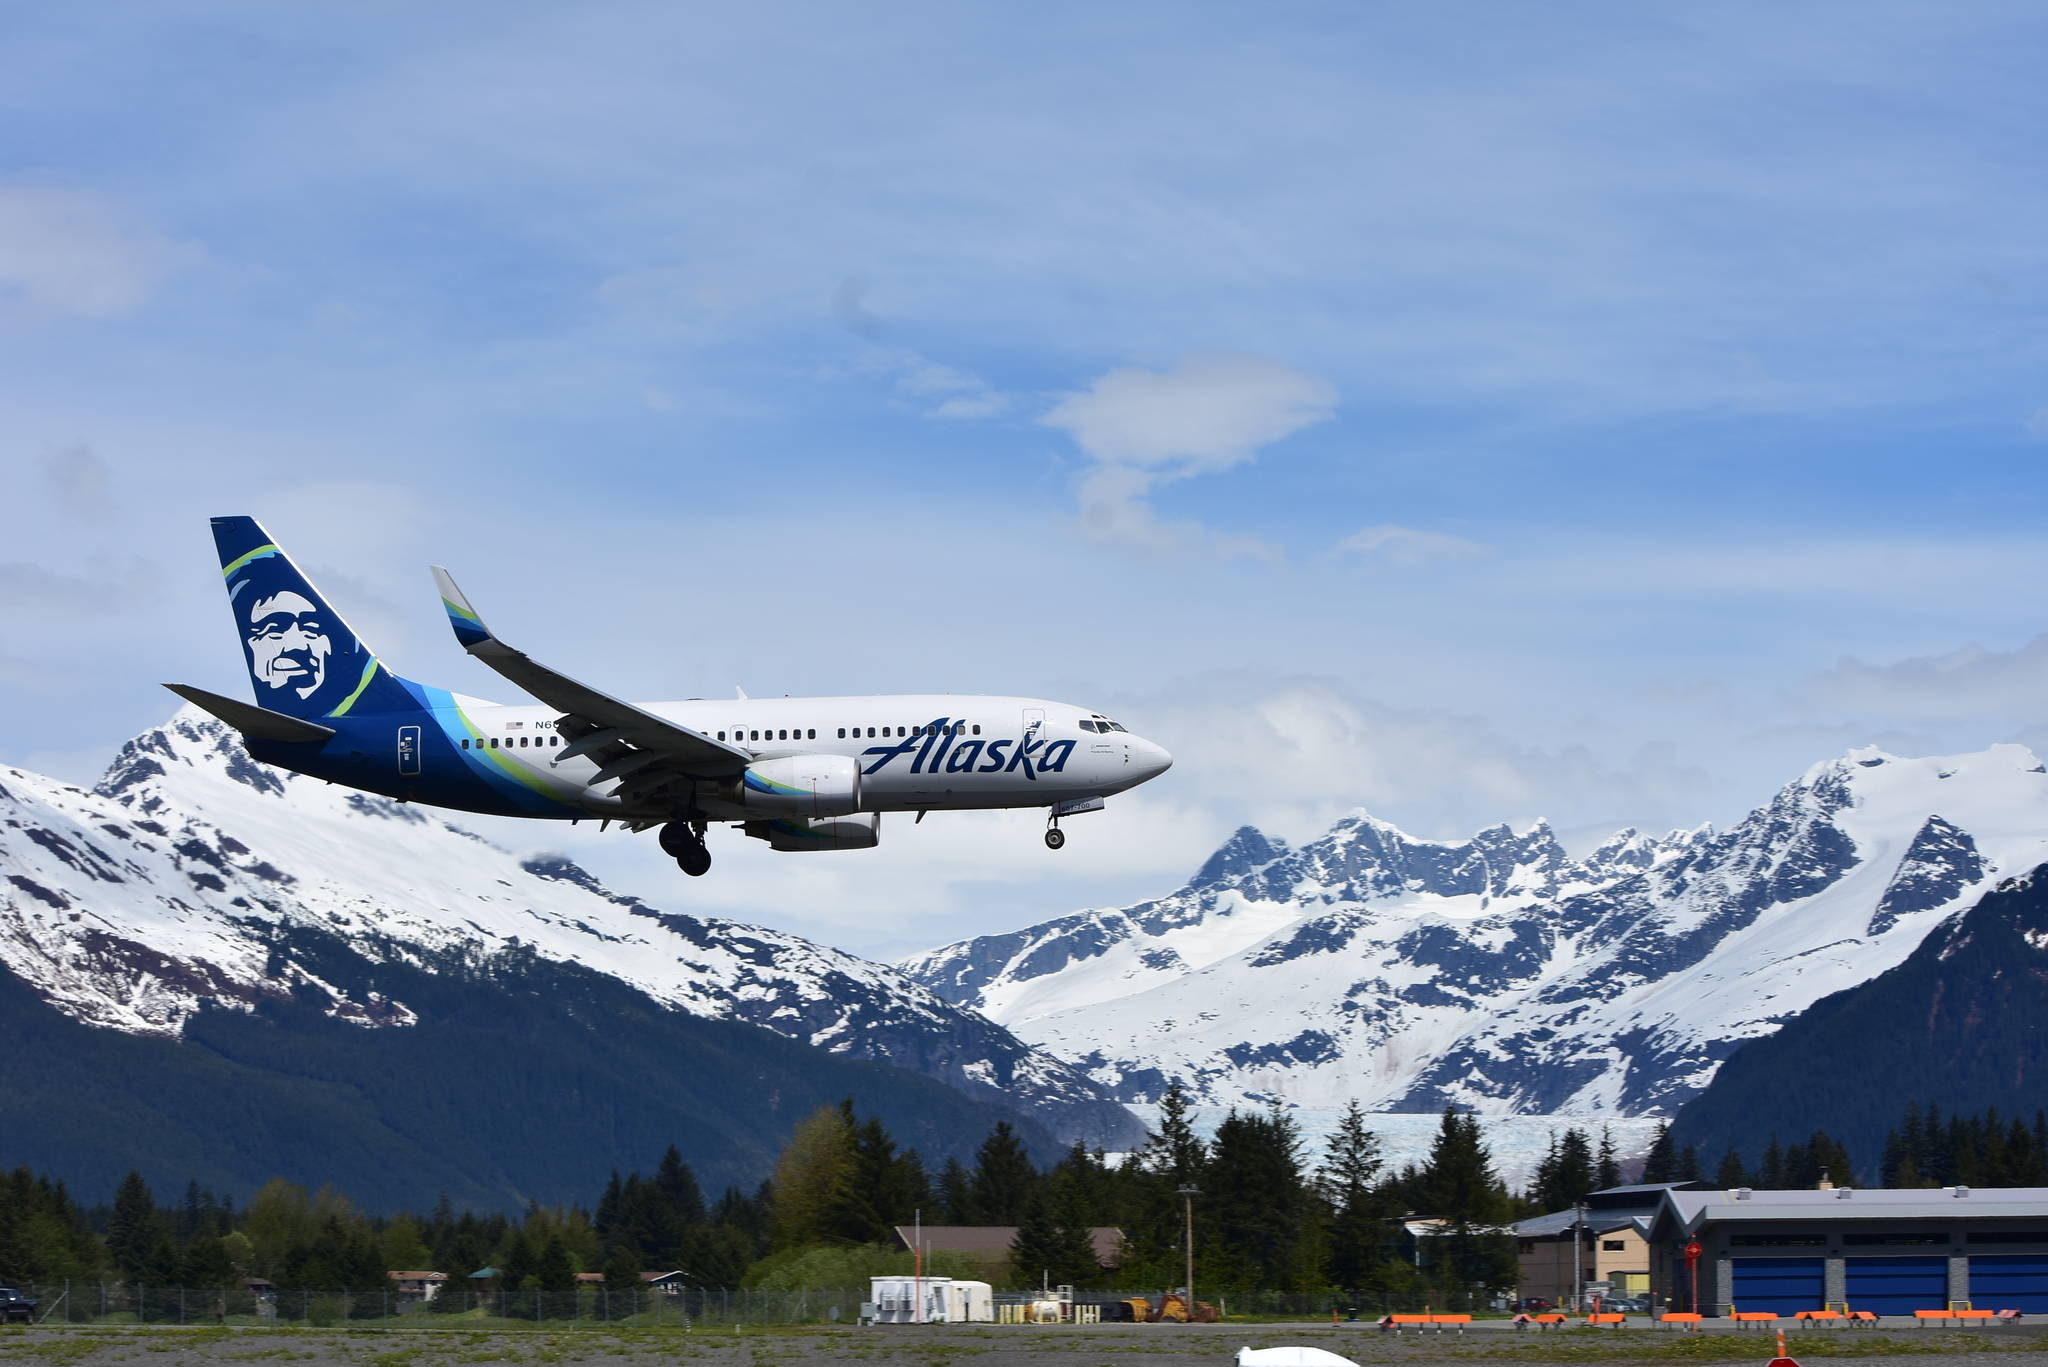 A plane lands at Juneau International Airport on May 25, 2021, as the number of travelers in the state started to rise after the lockdowns of 2020. Travel numbers are not back up to their pre-pandemic levels, but they are increasing according to local travel authorities. (Peter Segall / Juneau Empire file)